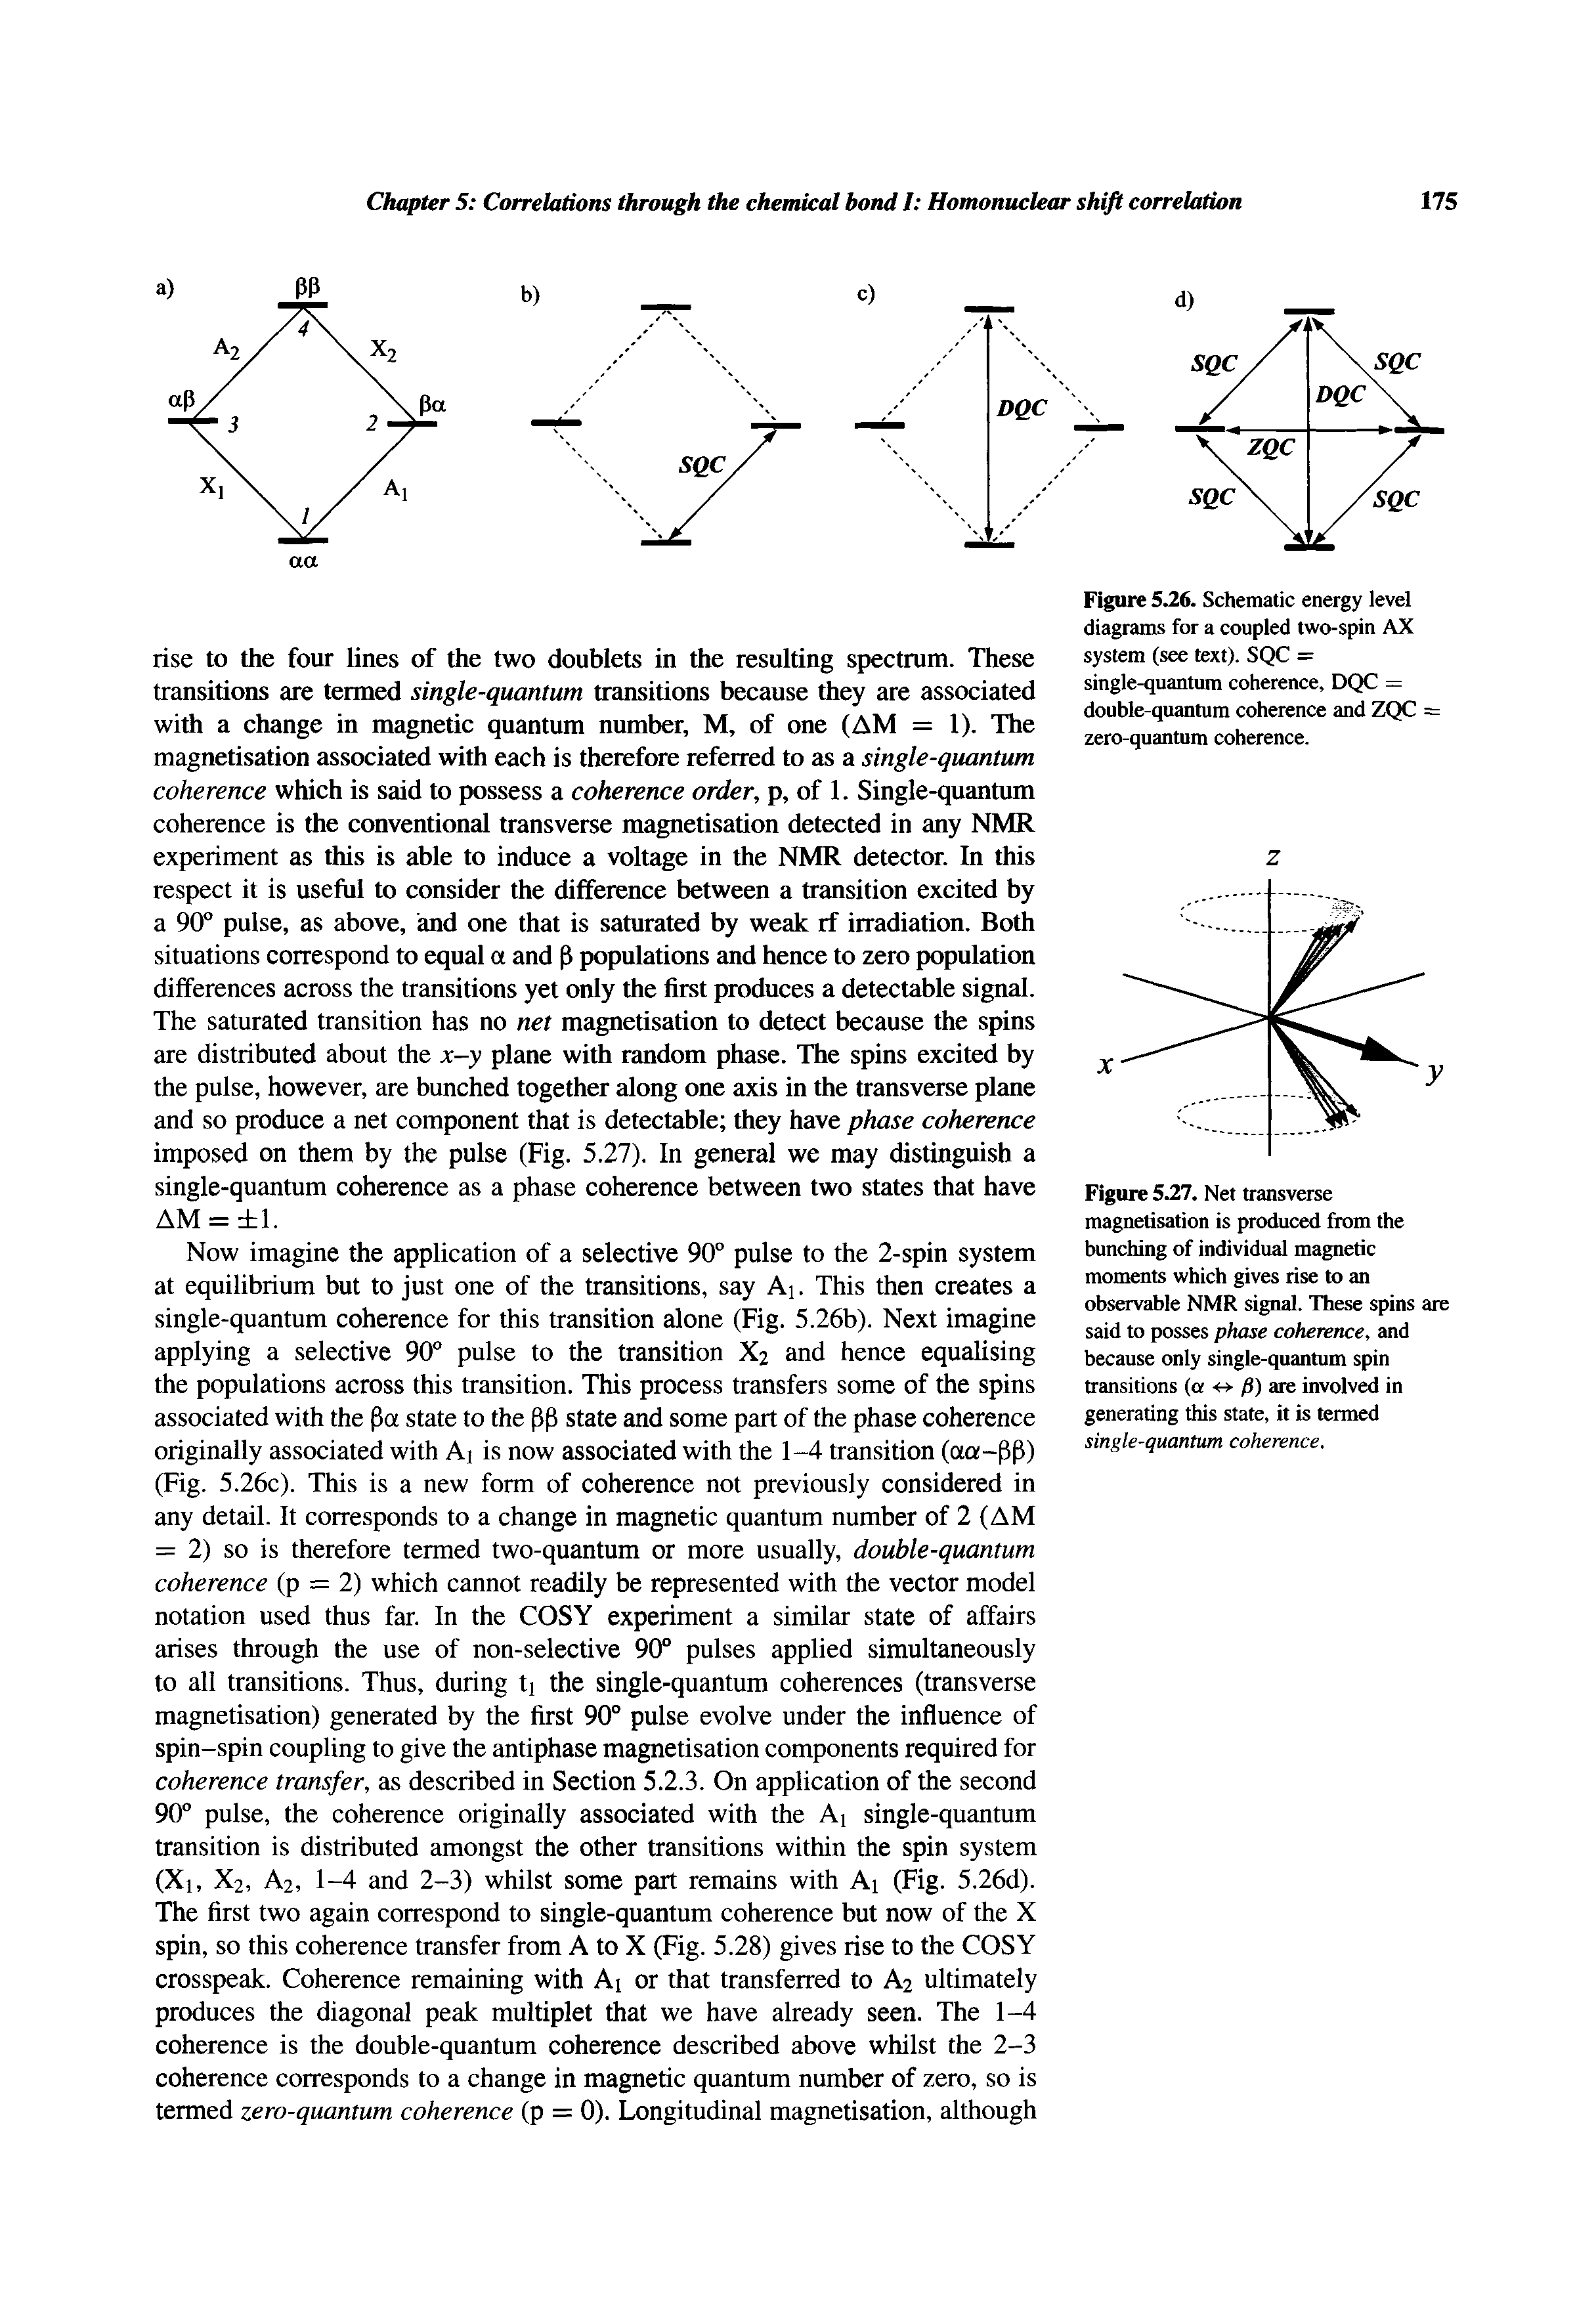 Figure 5.27. Net transverse magnetisation is produced from the bunching of individual magnetic moments which gives rise to an observable NMR signal. These spins are said to posses phase coherence, and because only single-quantum spin transitions (a <-> ) ate involved in generating this state, it is termed single-quantum coherence.